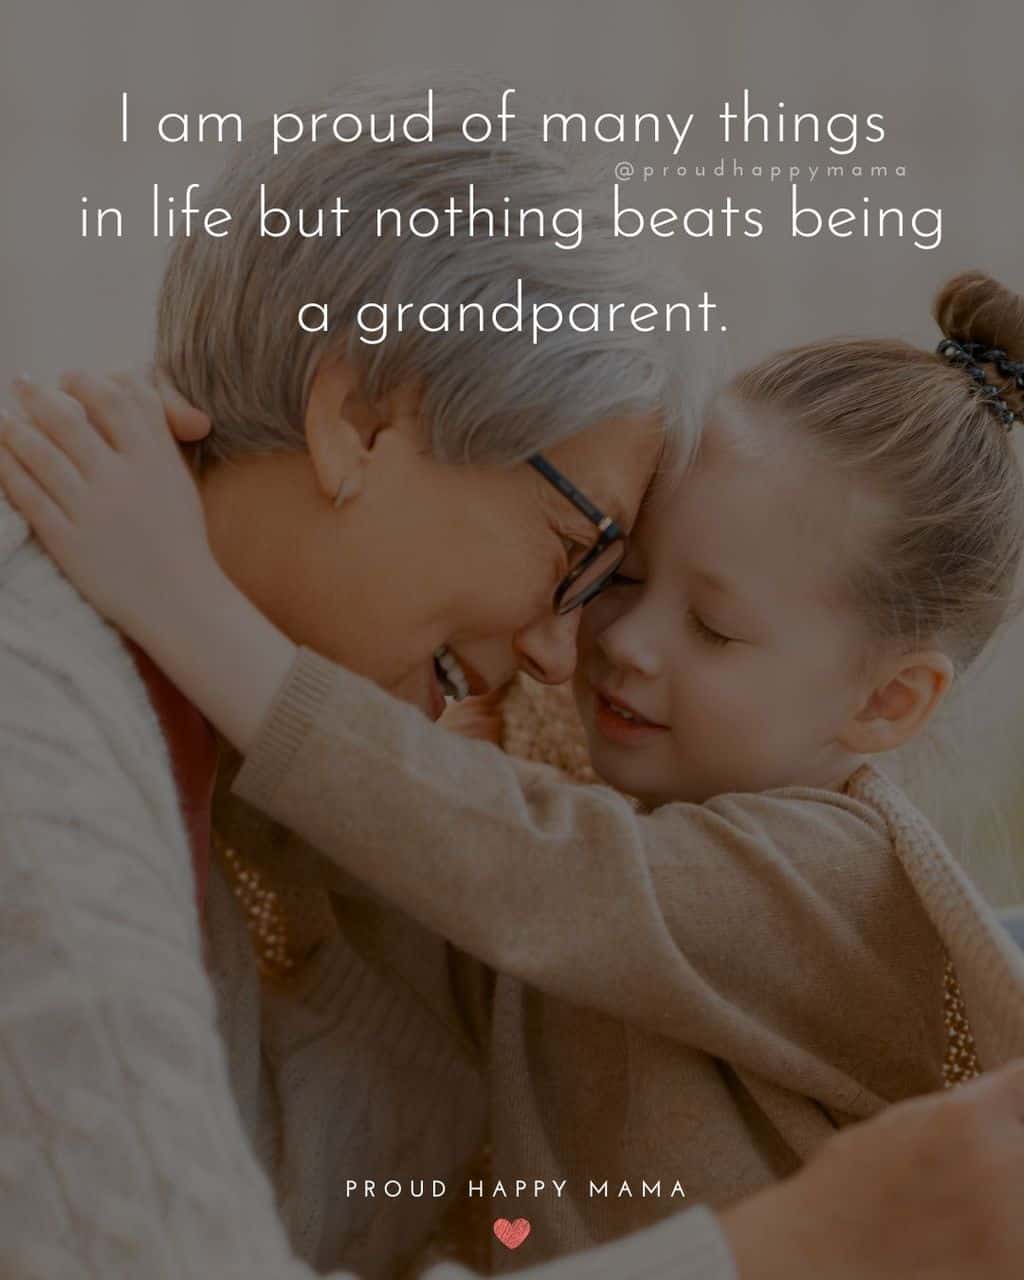 Grandparent Quotes – I am proud of many things in life but nothing beats being a grandparent.’